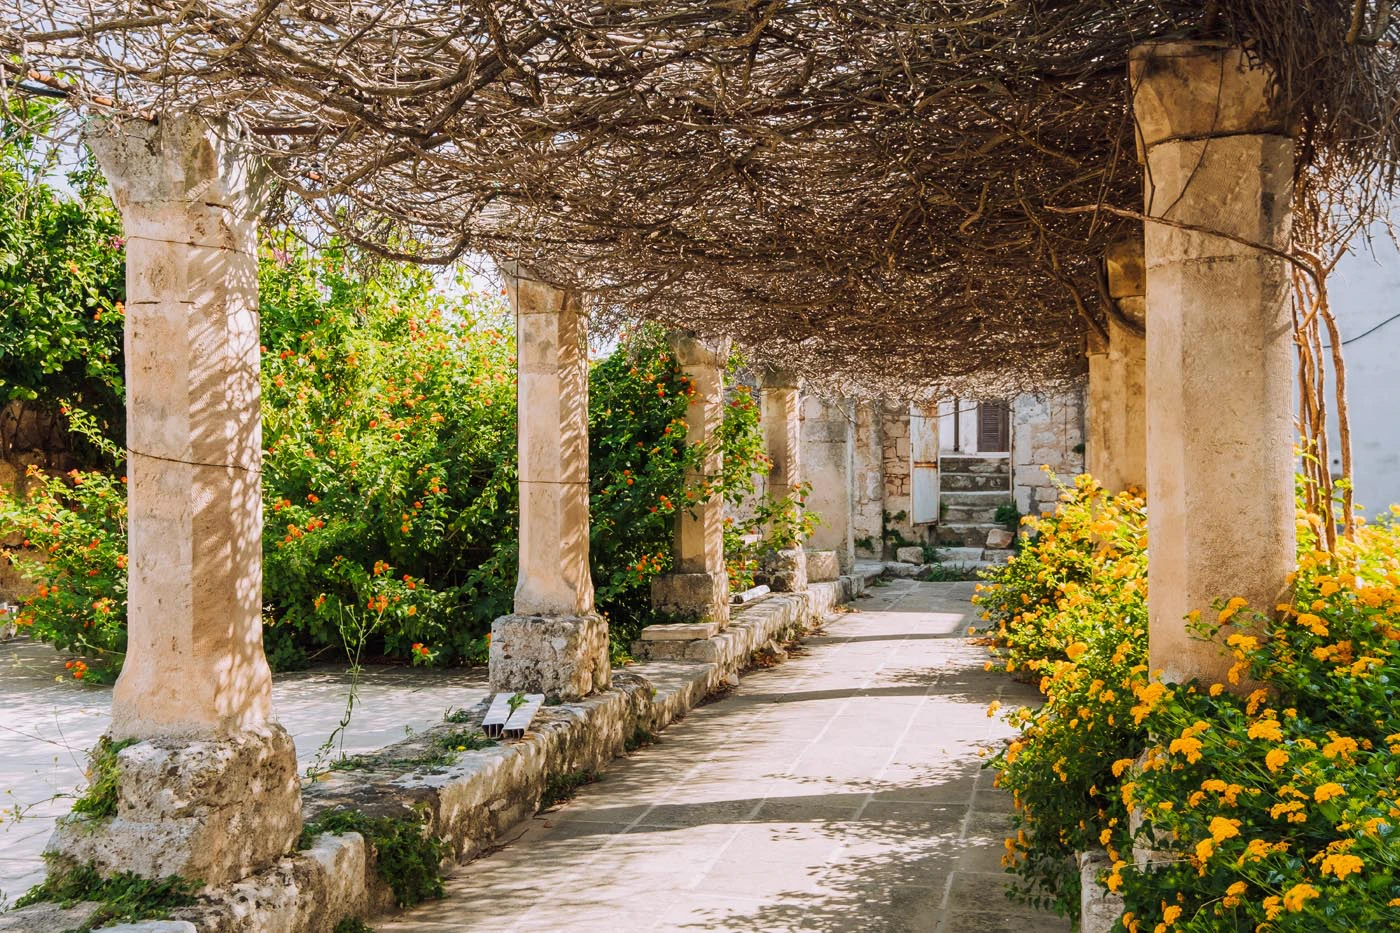 Things to do in Ostuni - Museo Diocesano di Ostuni - Rooftop Garden